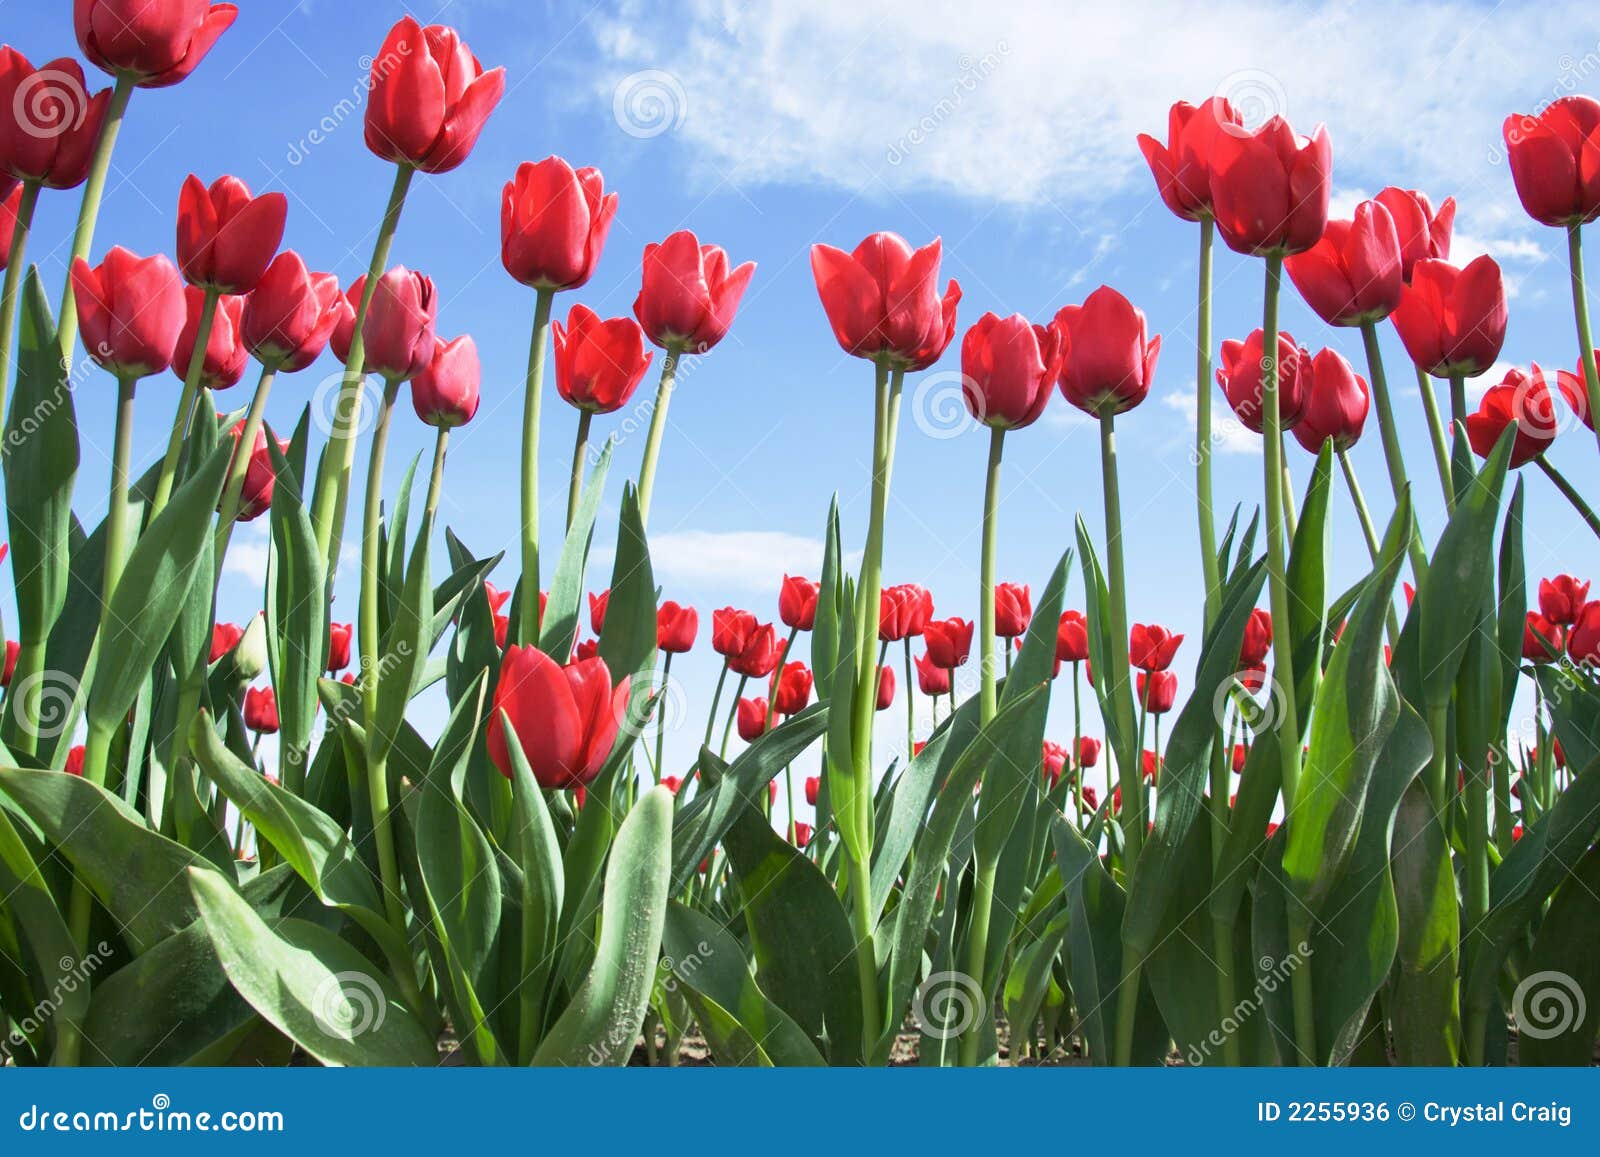 bright red tulips